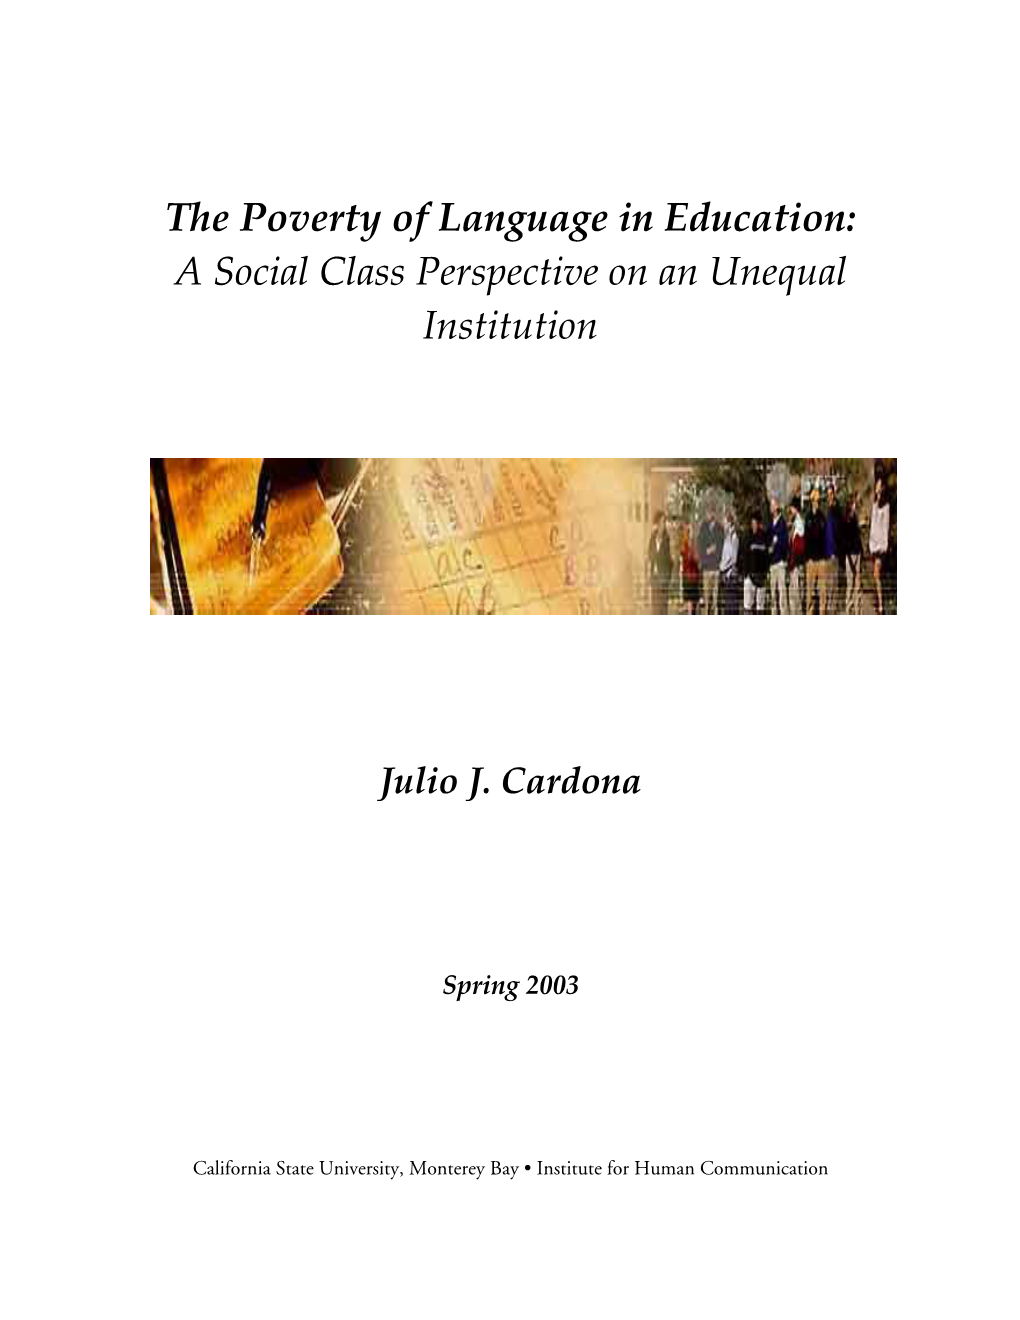 The Poverty of Language in Education: a Social Class Perspective on an Unequal Institution